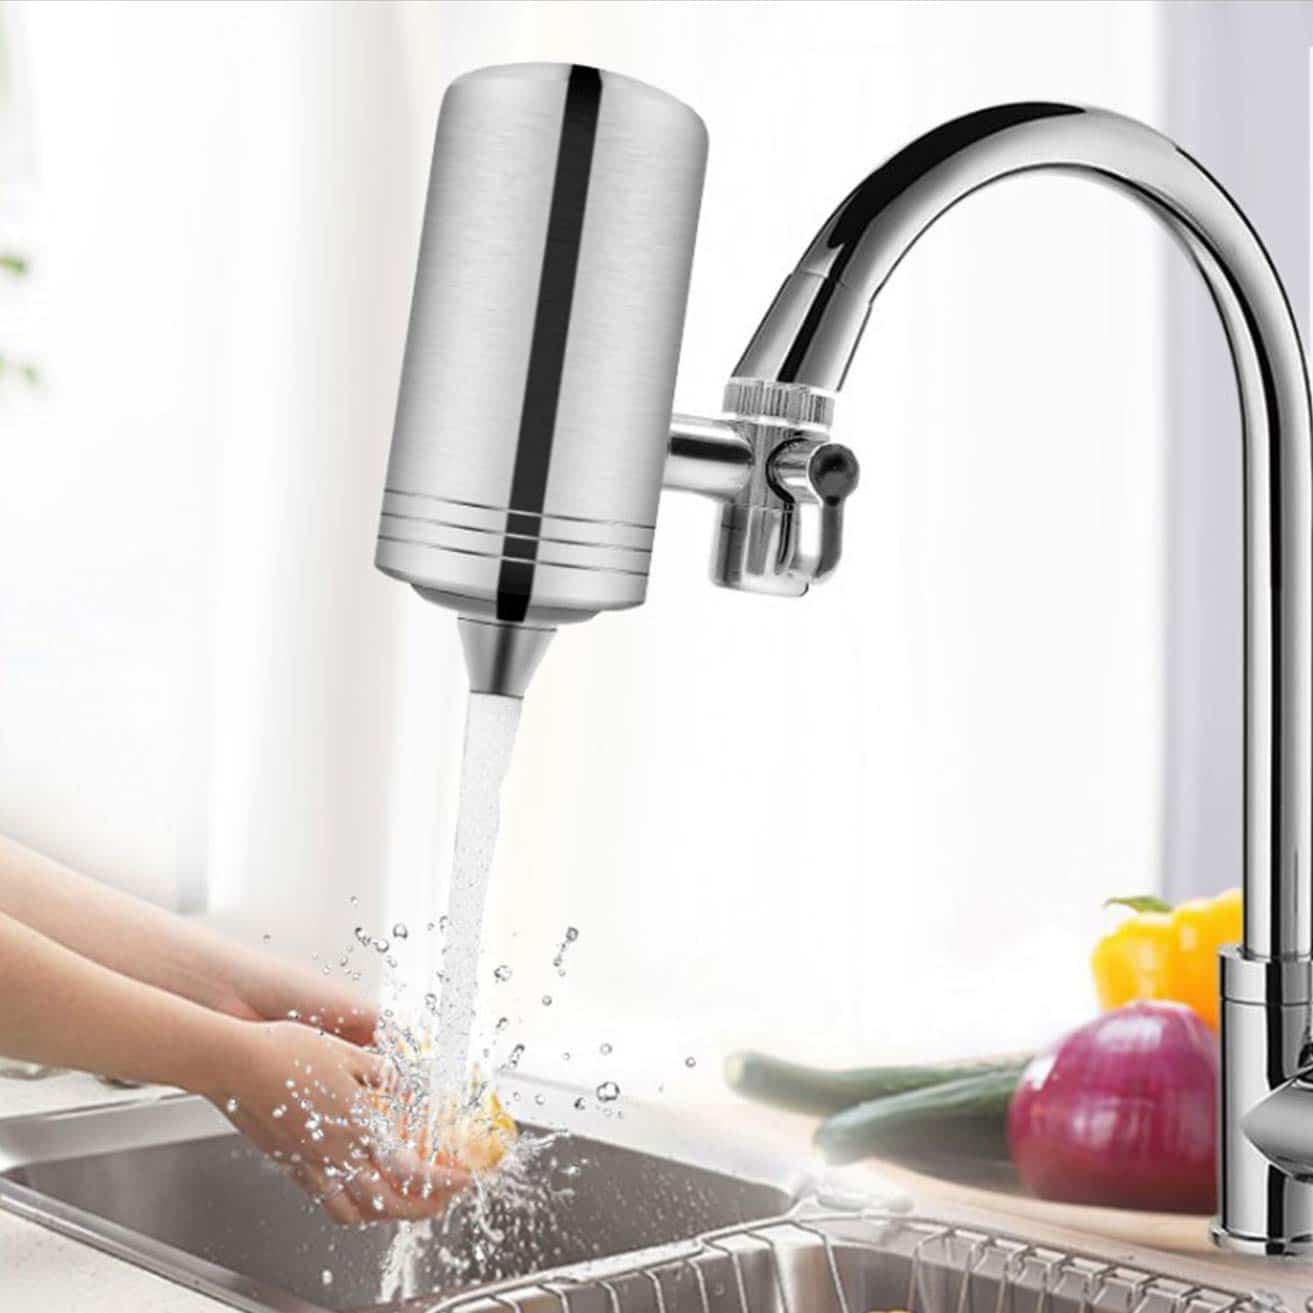 Aibika Water Faucet Filter System